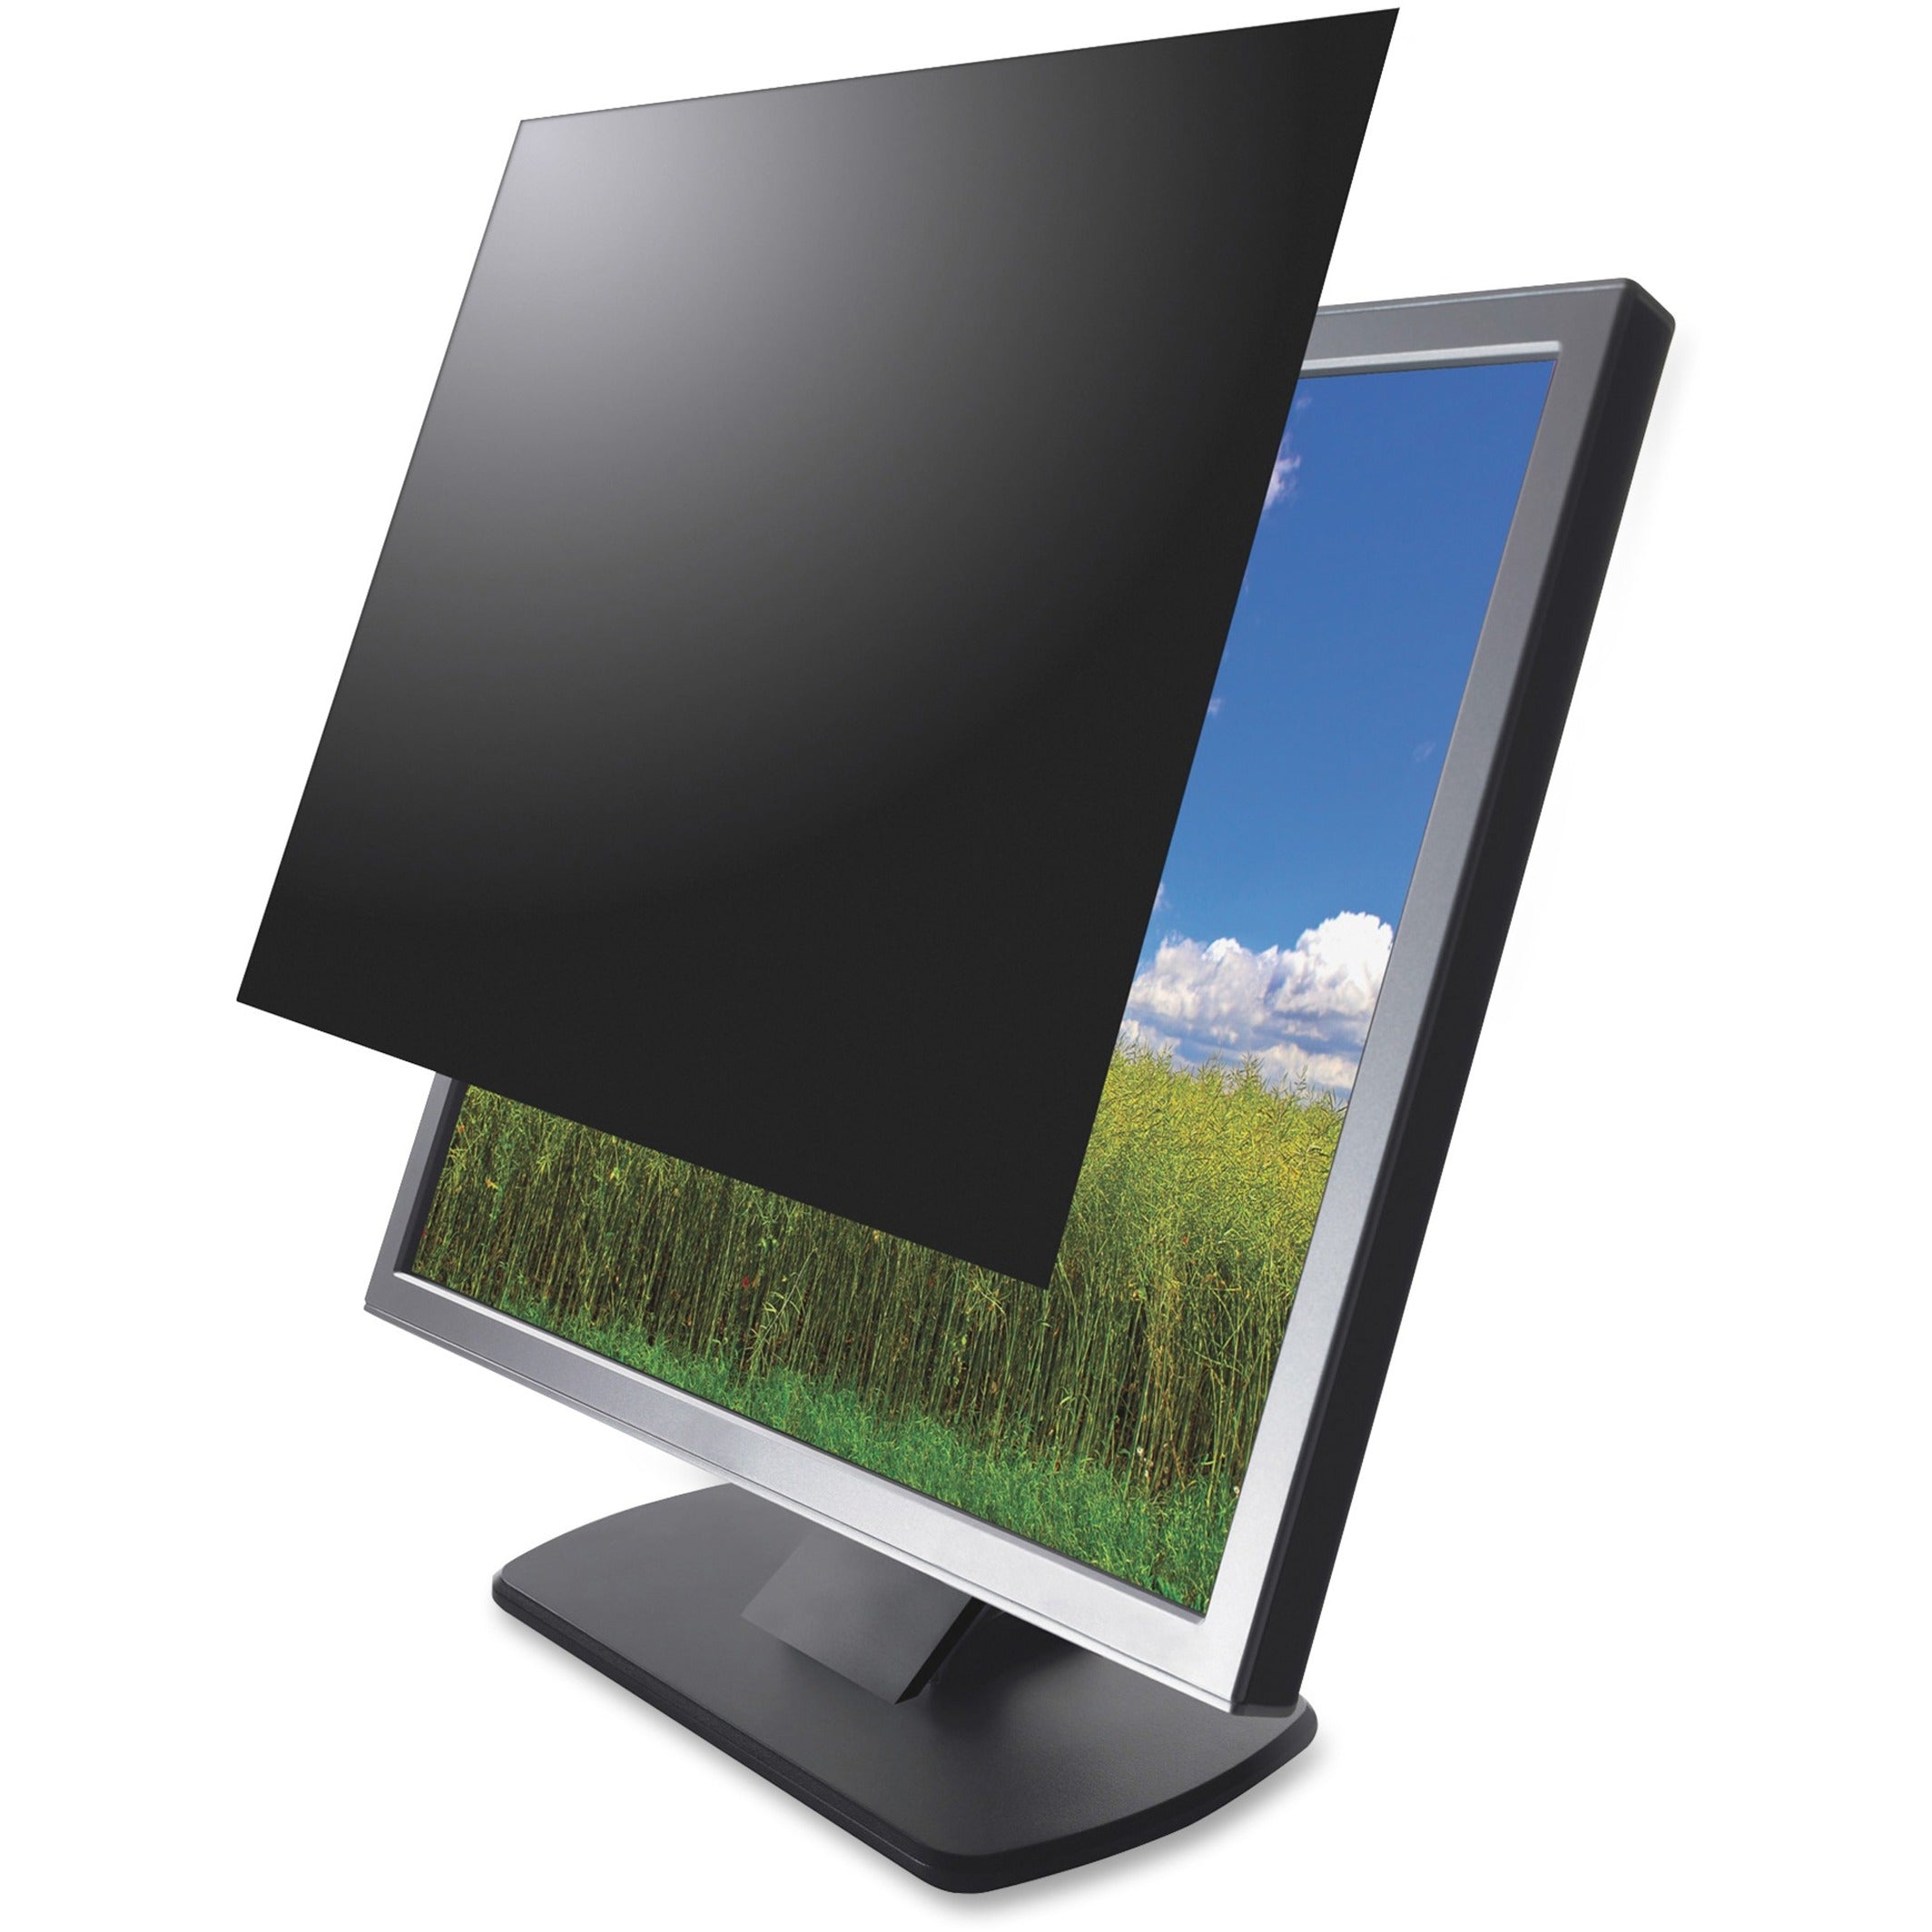 Kantek SVL24W9 Secure-View Fresnel Widescreen Monitor Magnifier Lens, Privacy Filter for 24 LCD Display, Black